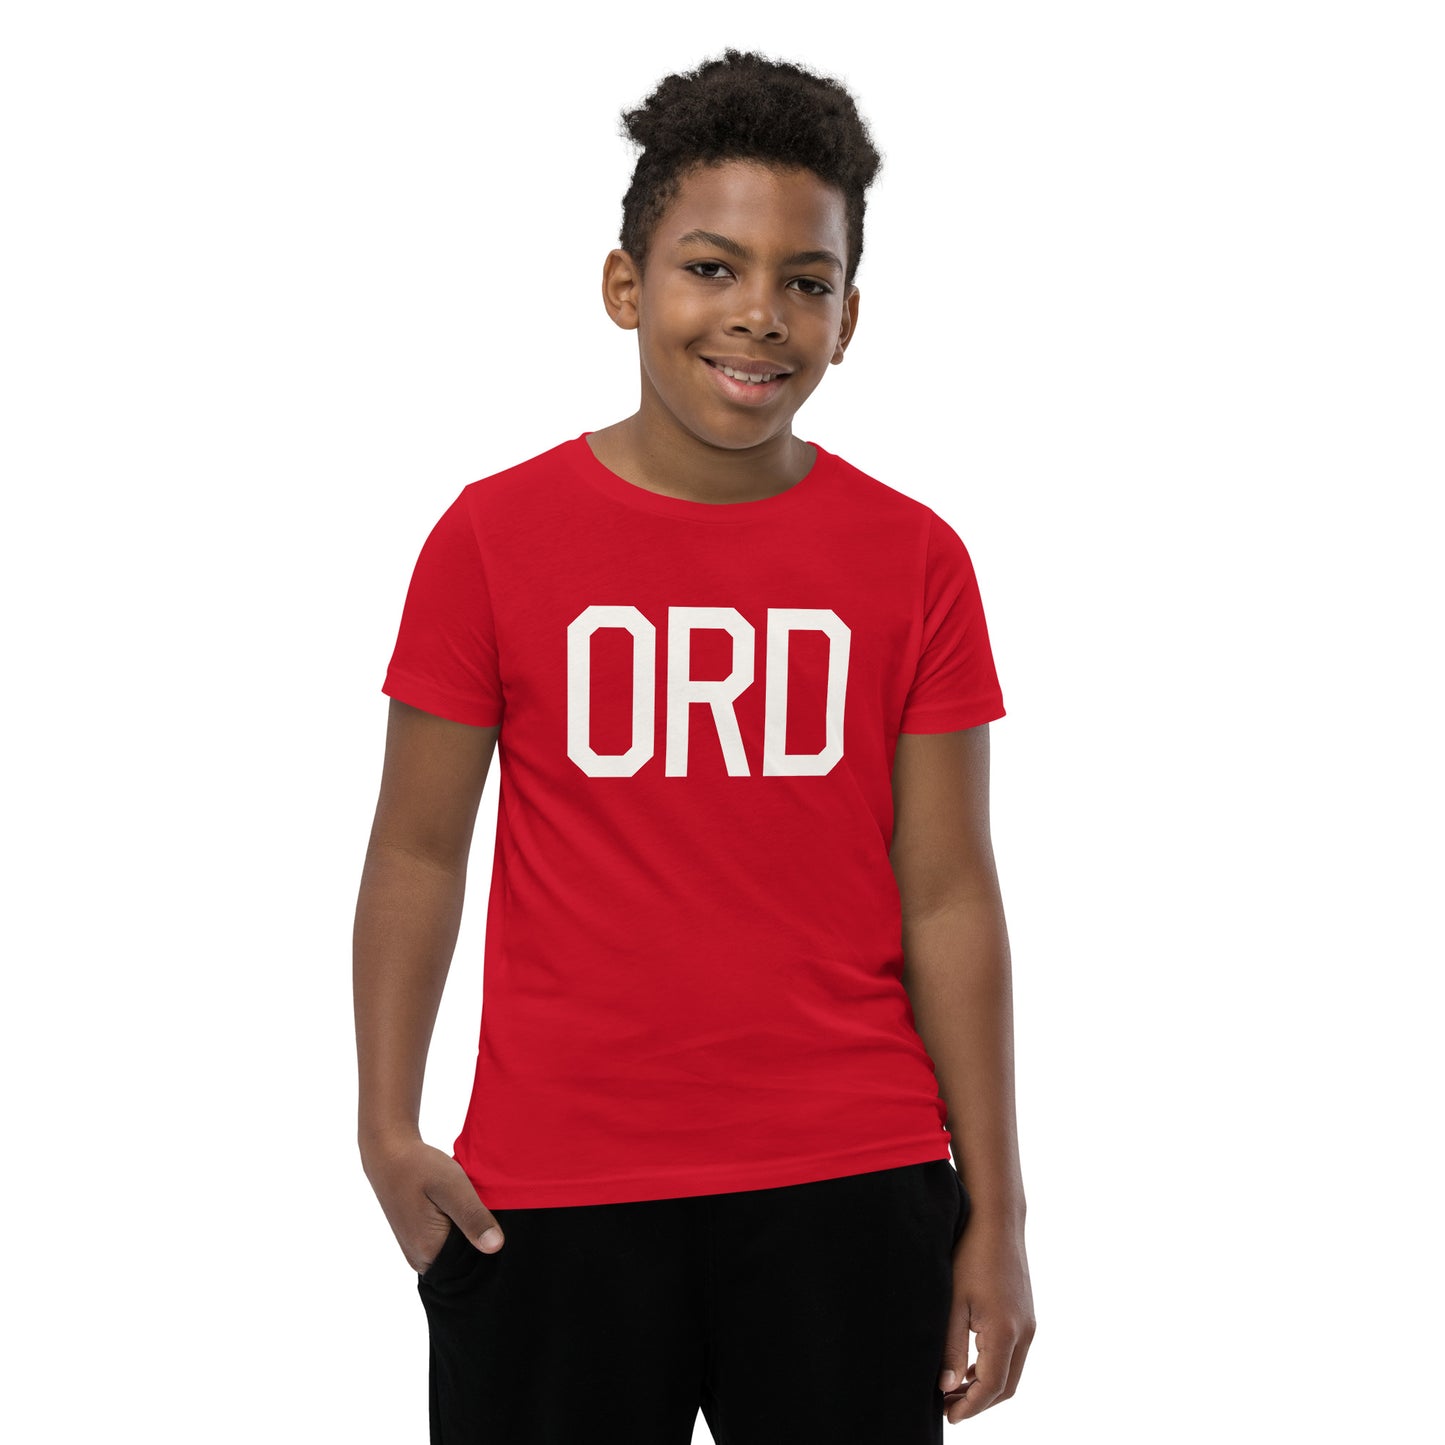 Kid's T-Shirt - White Graphic • ORD Chicago • YHM Designs - Image 09